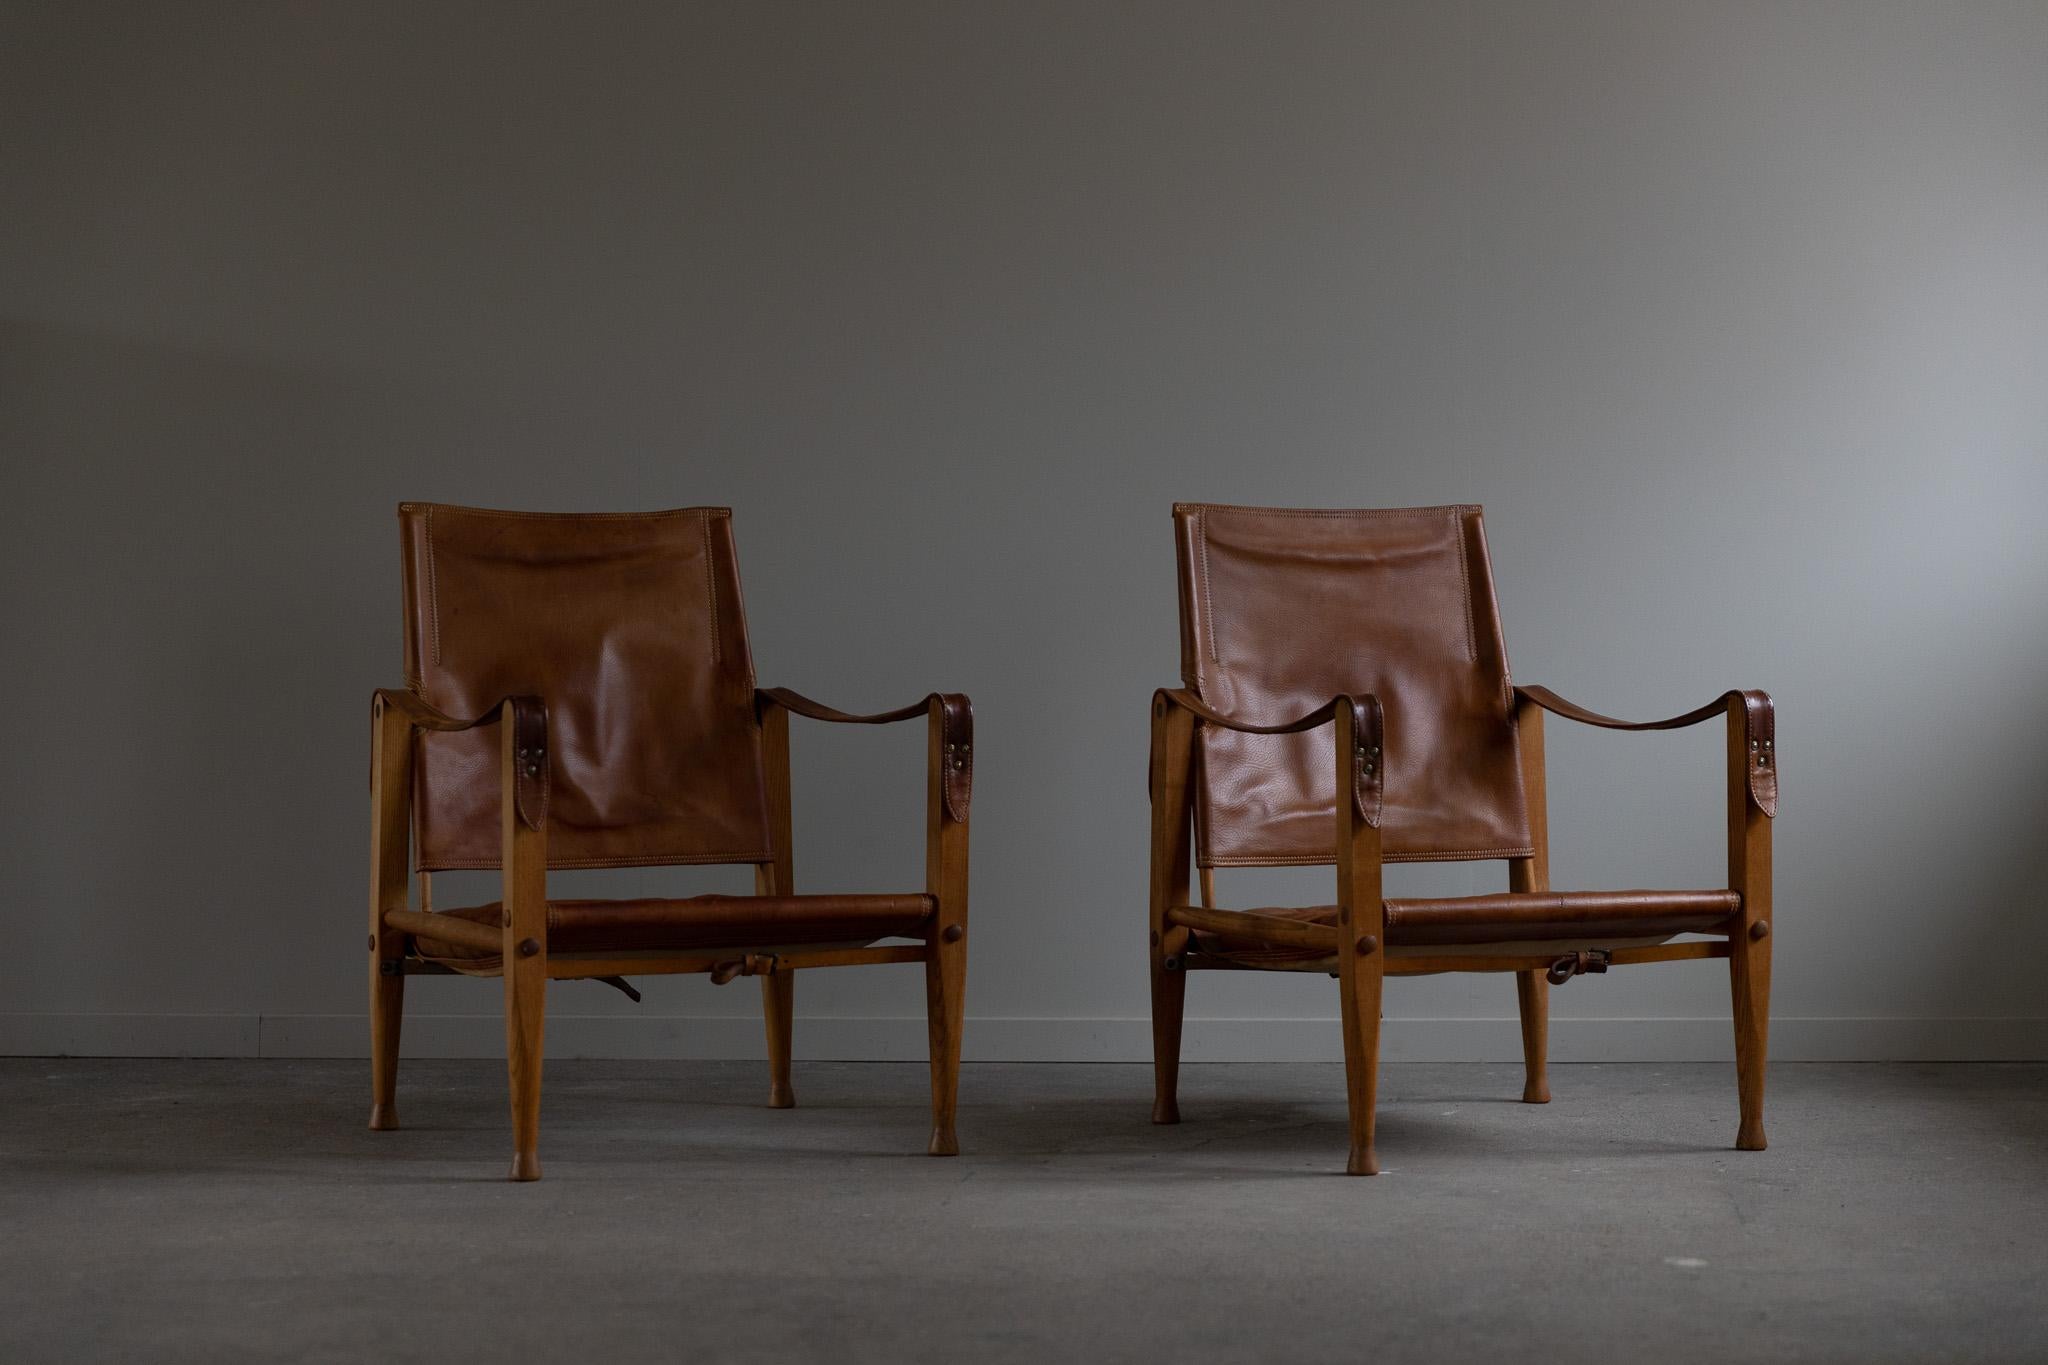 Hand-Crafted Kaare Klint, a Pair of Safari Chairs in Ash & Leather, Rud. Rasmussen, 1950s